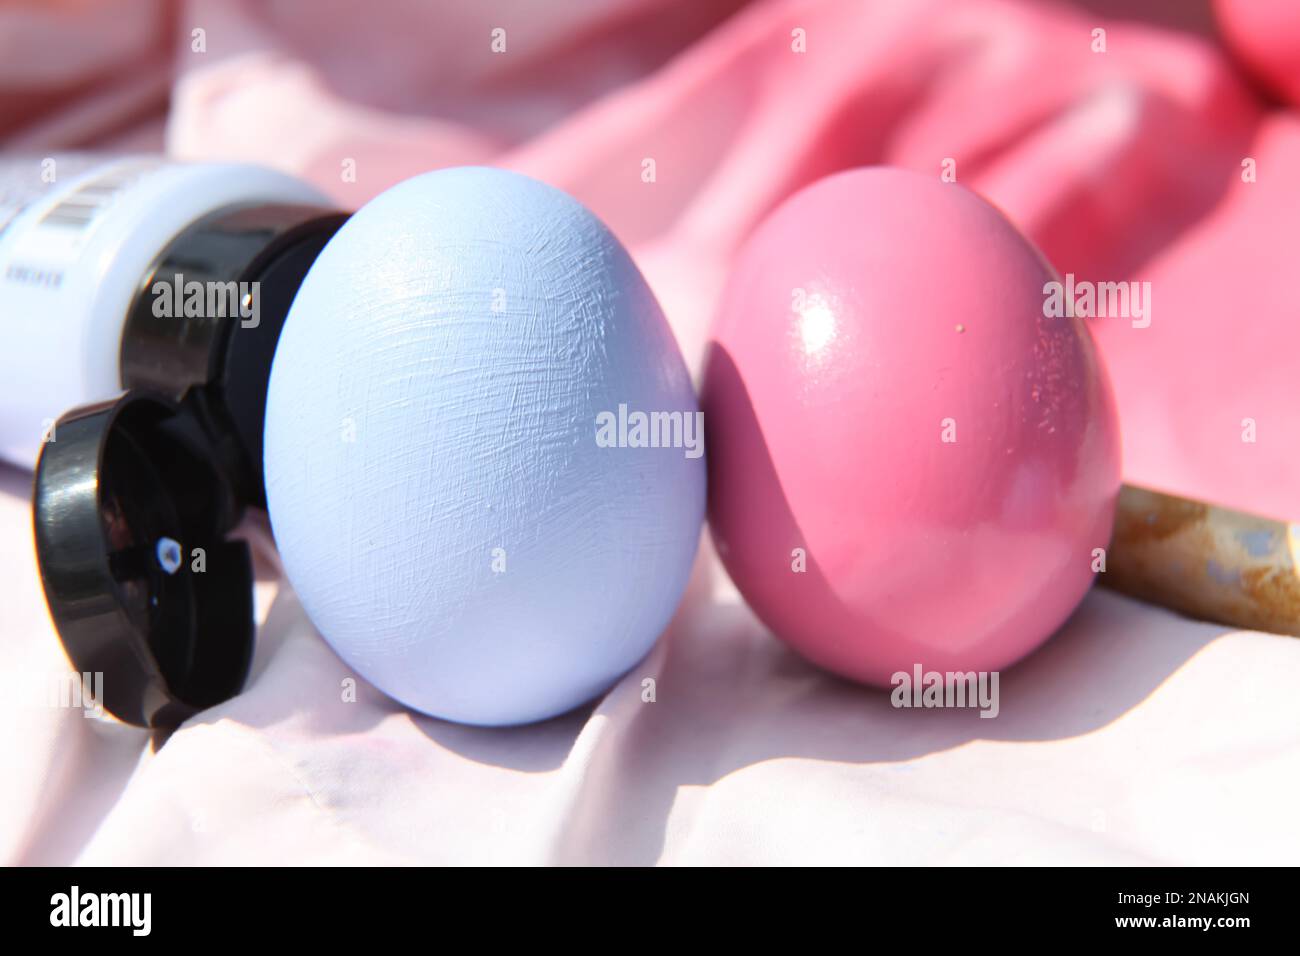 Easter crafts, painting a real egg with blue and pink paint for Easter with paintbrush, crafting, UK Stock Photo